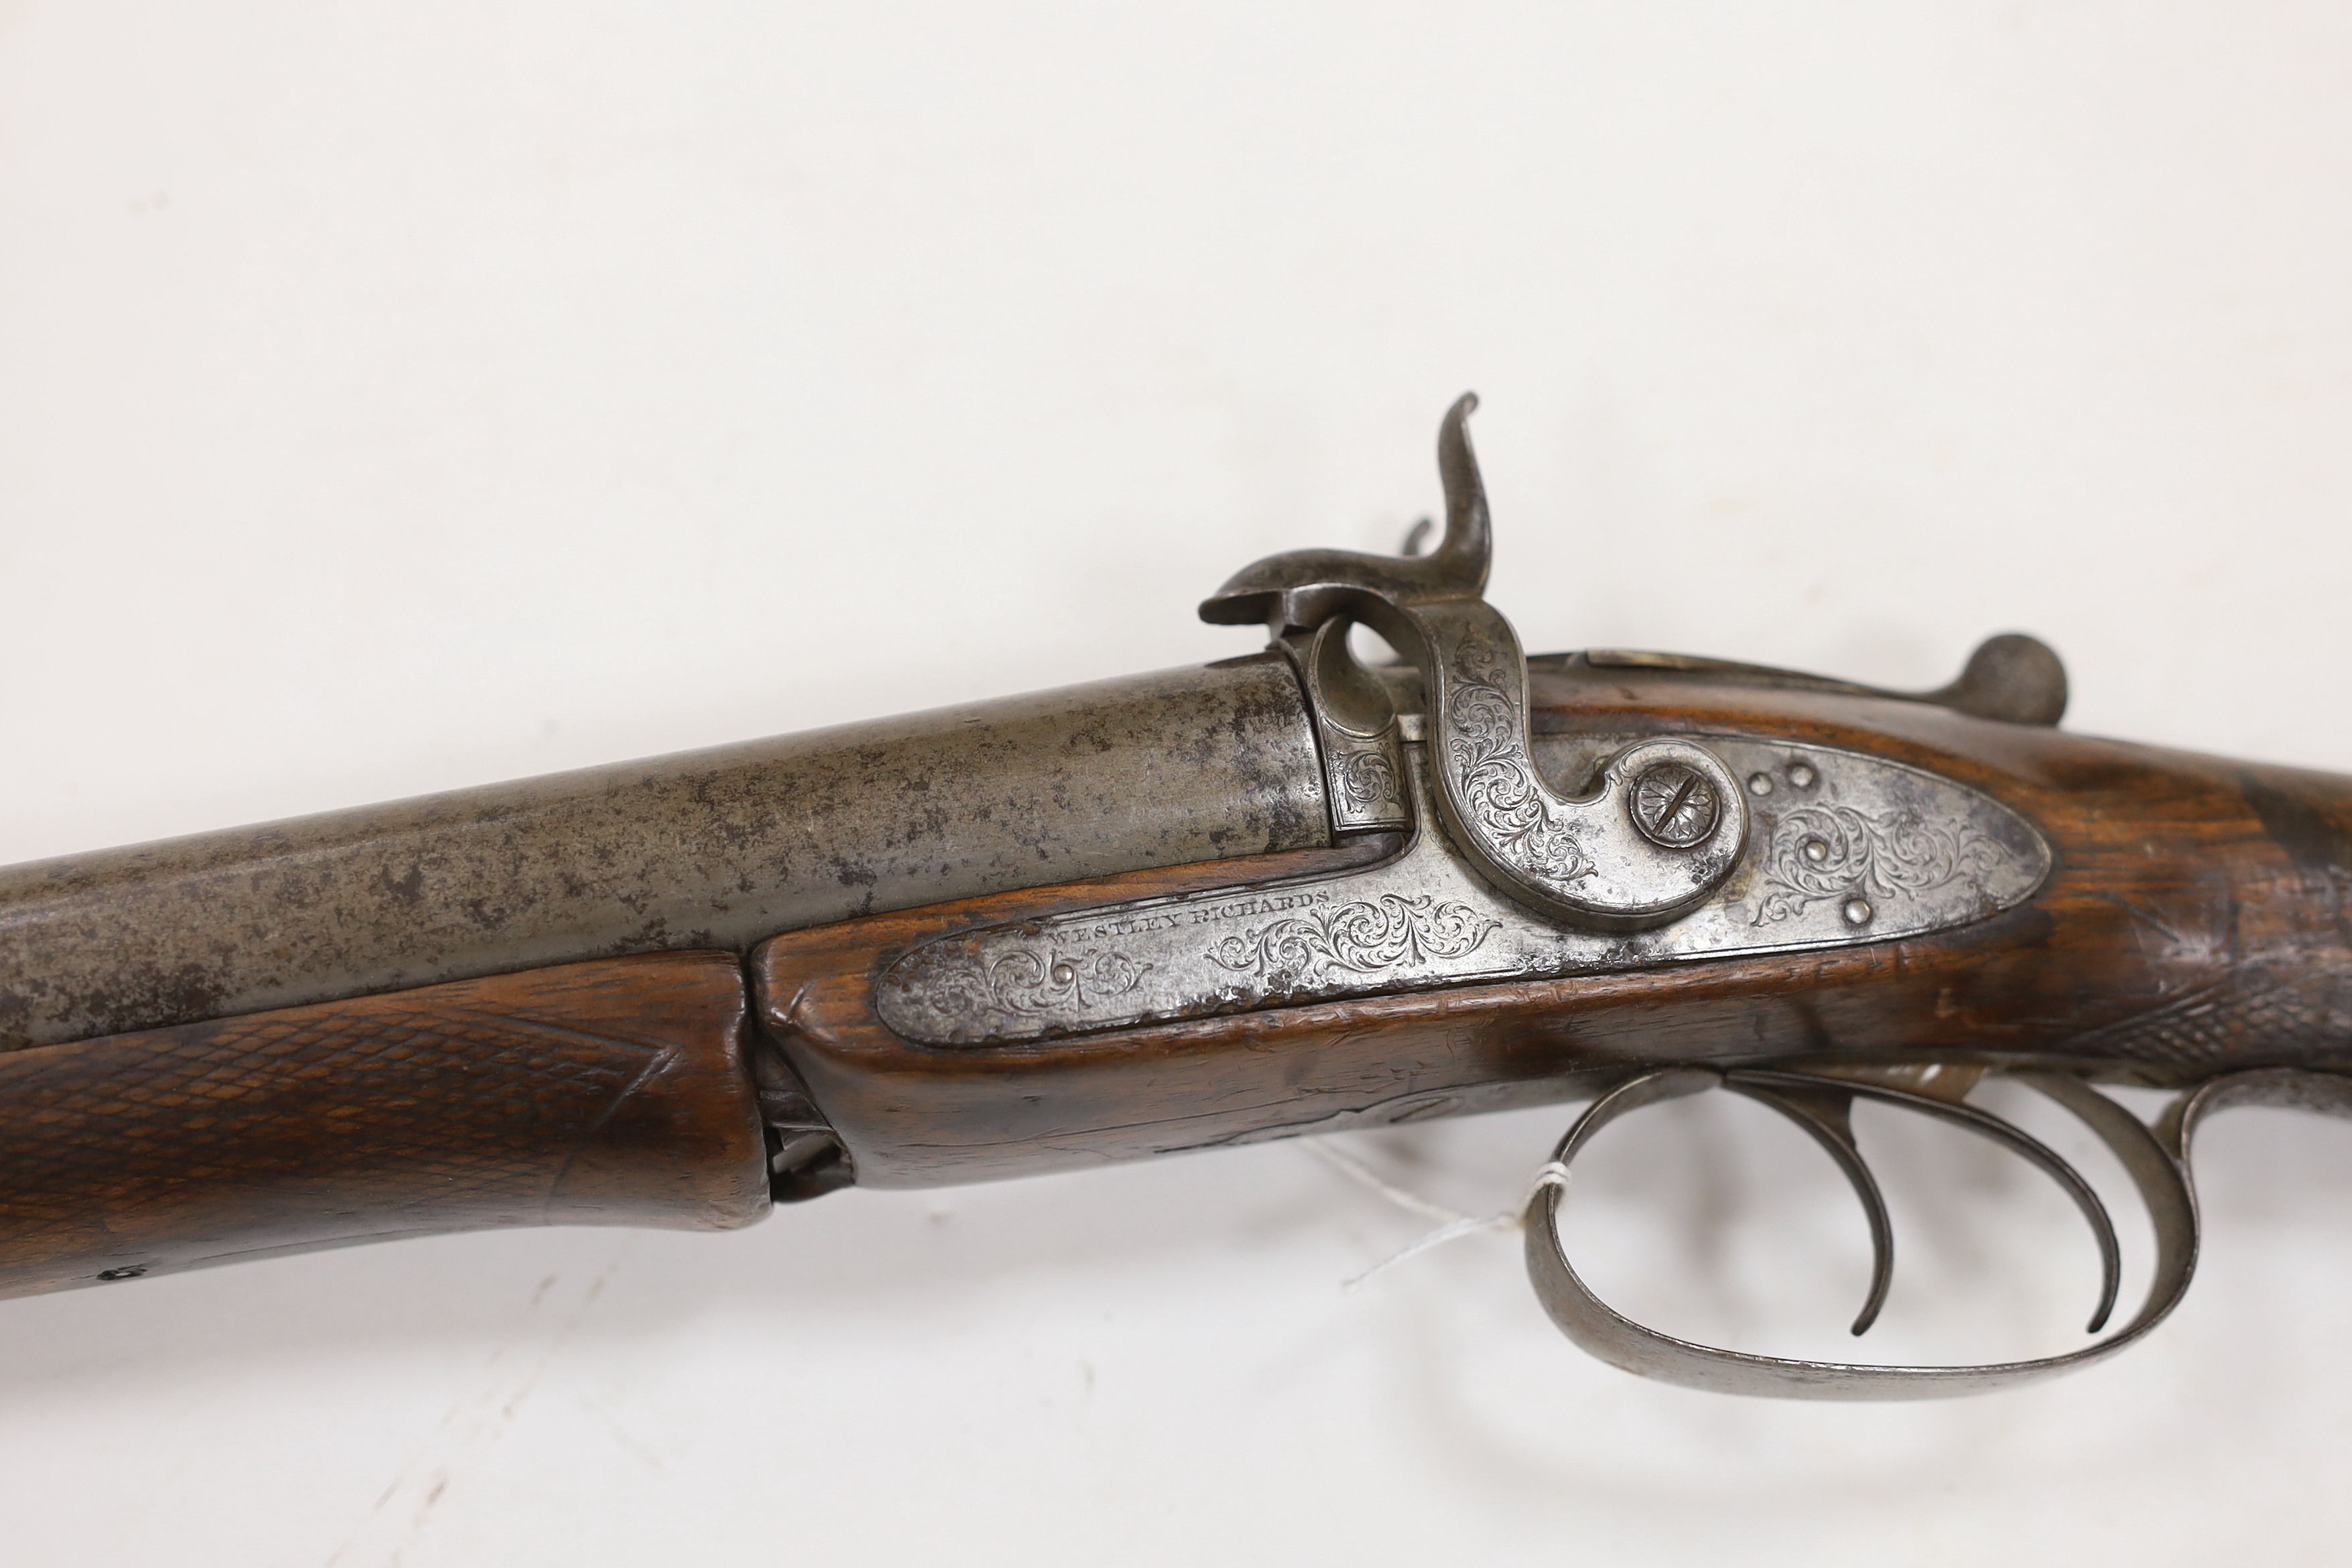 A double barrel pinfire shotgun by Wesley Richards with patent knuckle joint and top lever, barrels 74.5cm